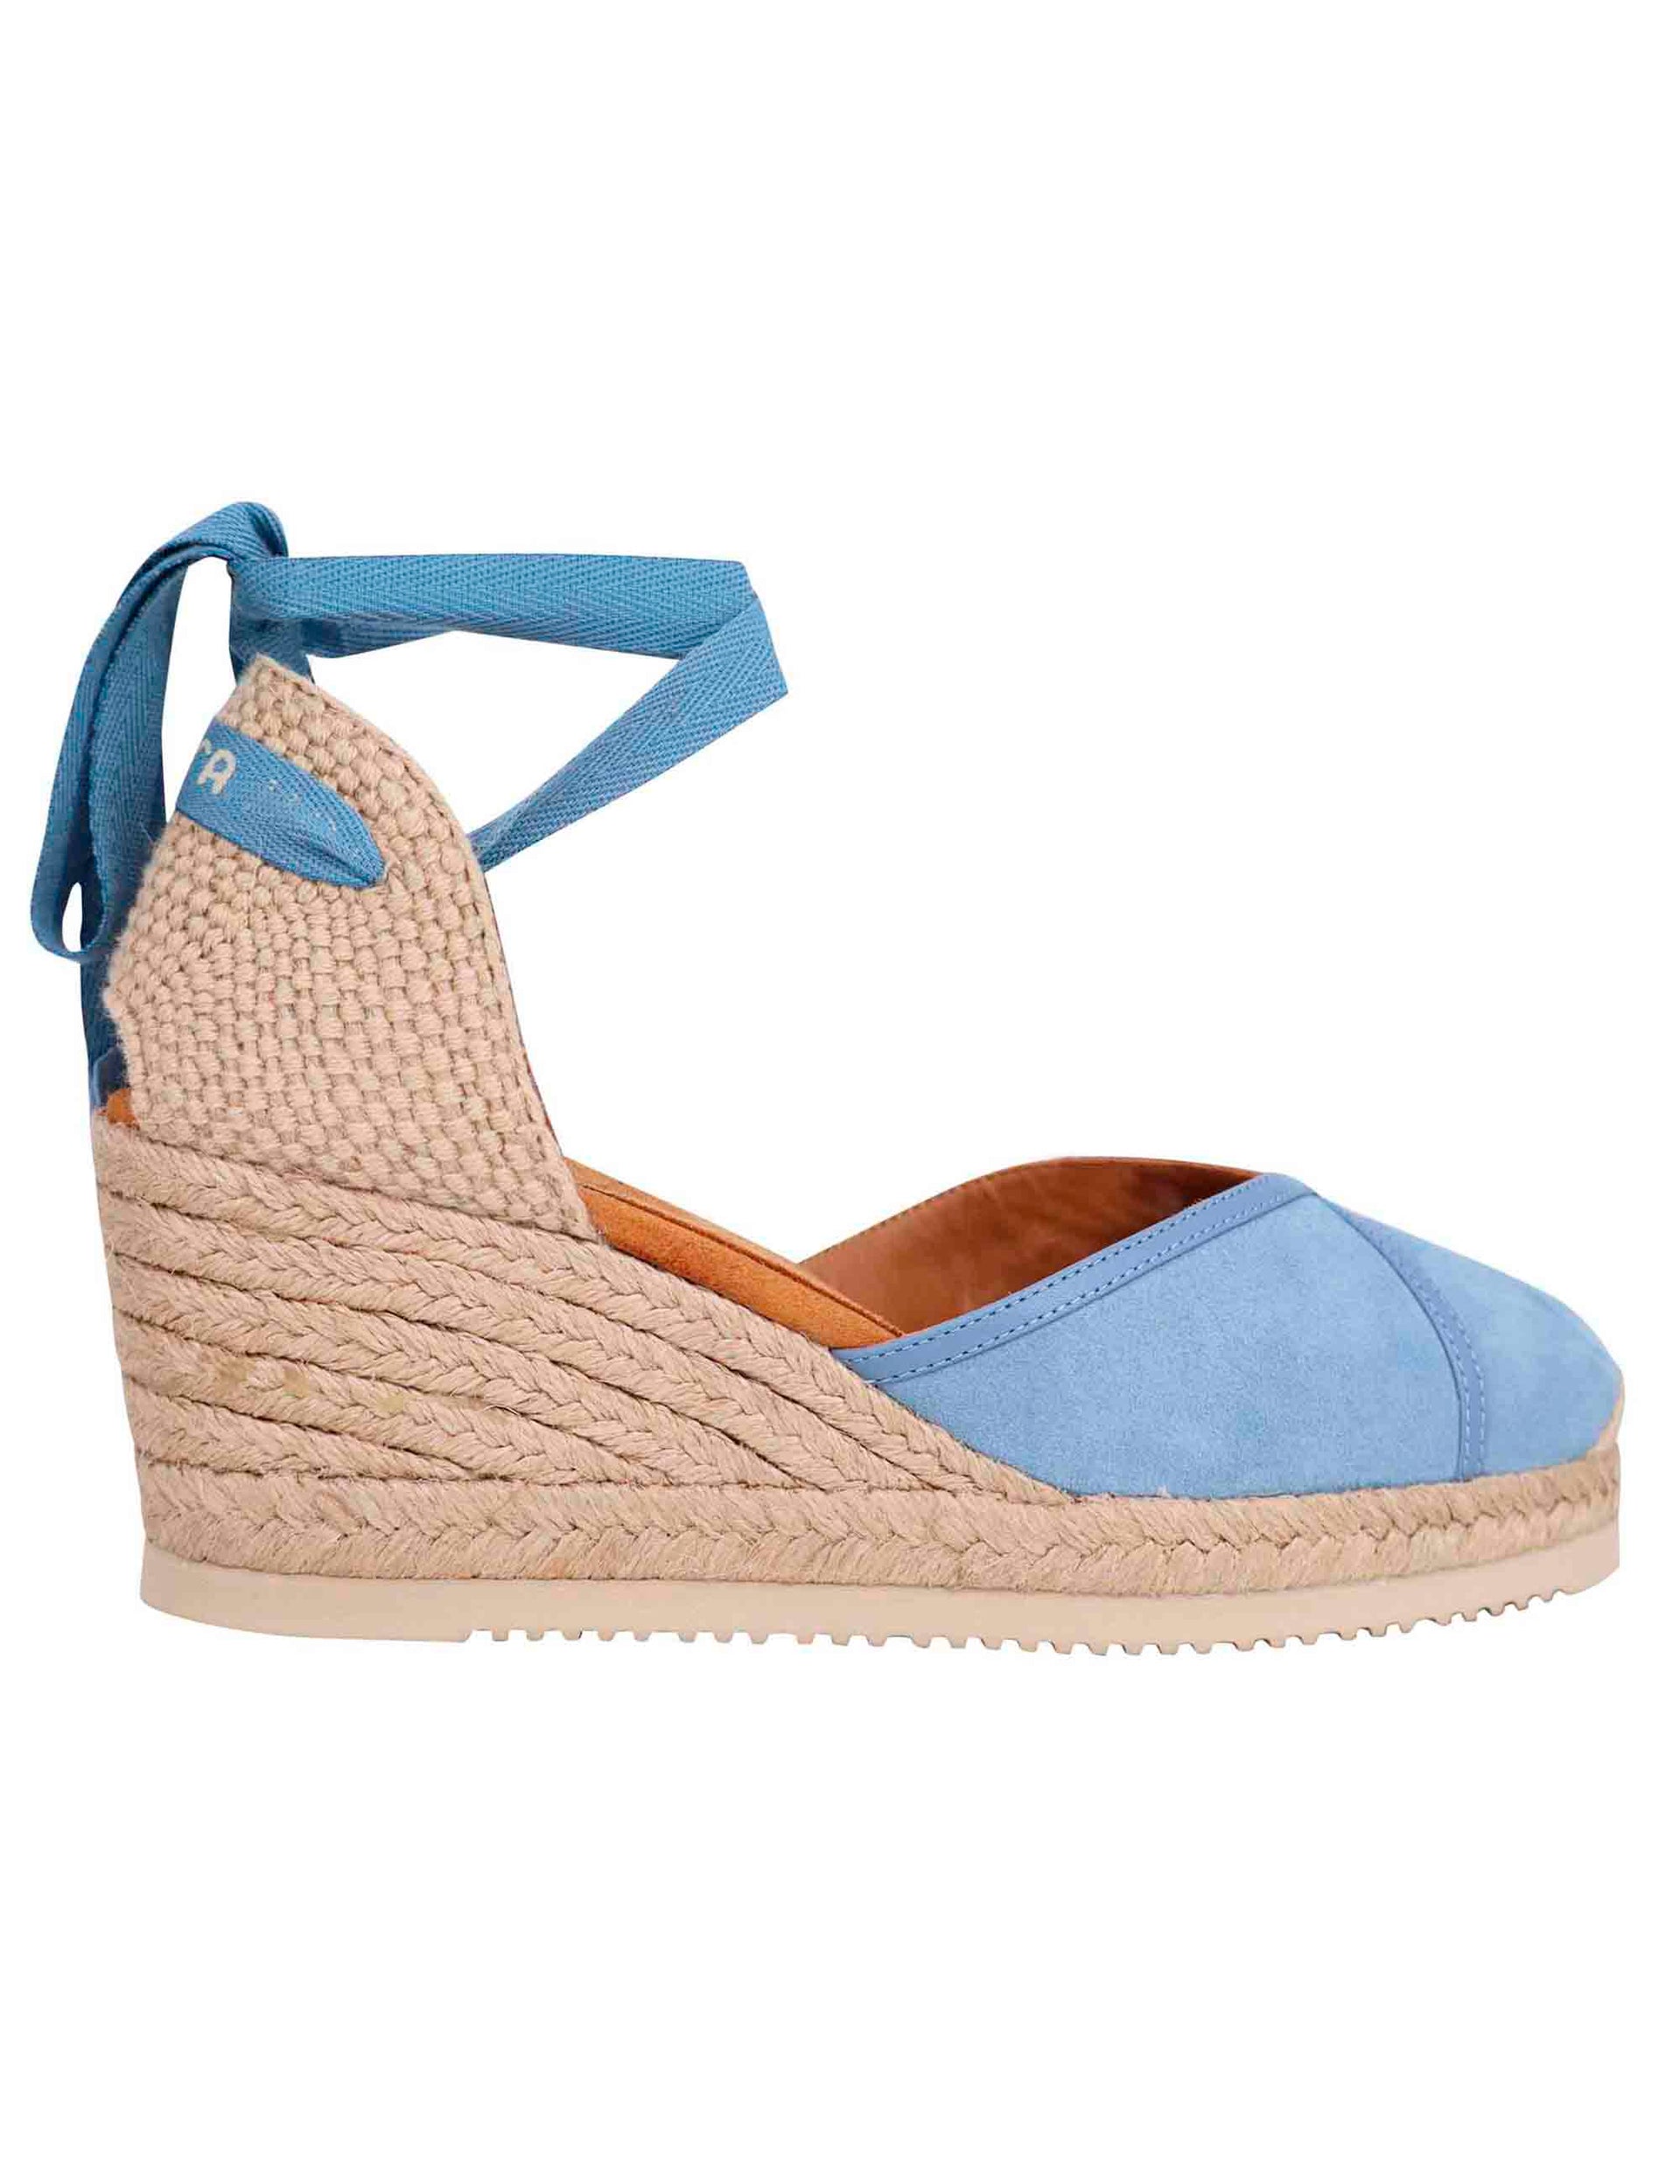 Women's espadrilles sandals in light blue suede with rope wedge